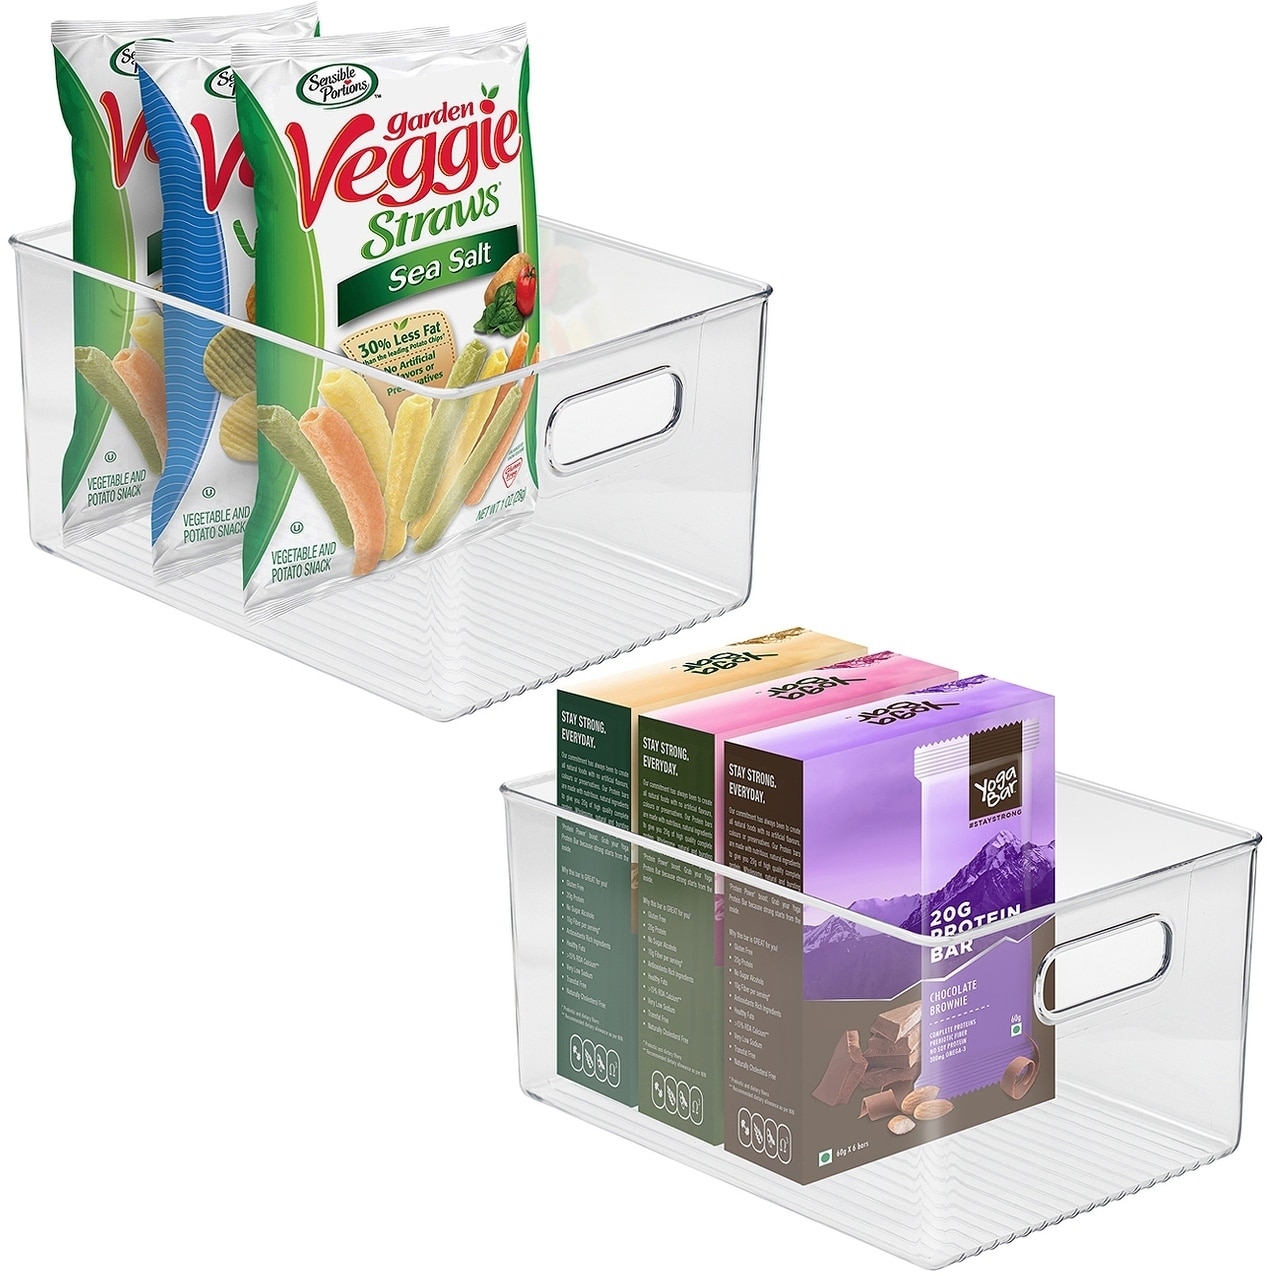 Sorbus Clear Soda Can Organizer Holder with Lid, 9 Cans (2-Pack)